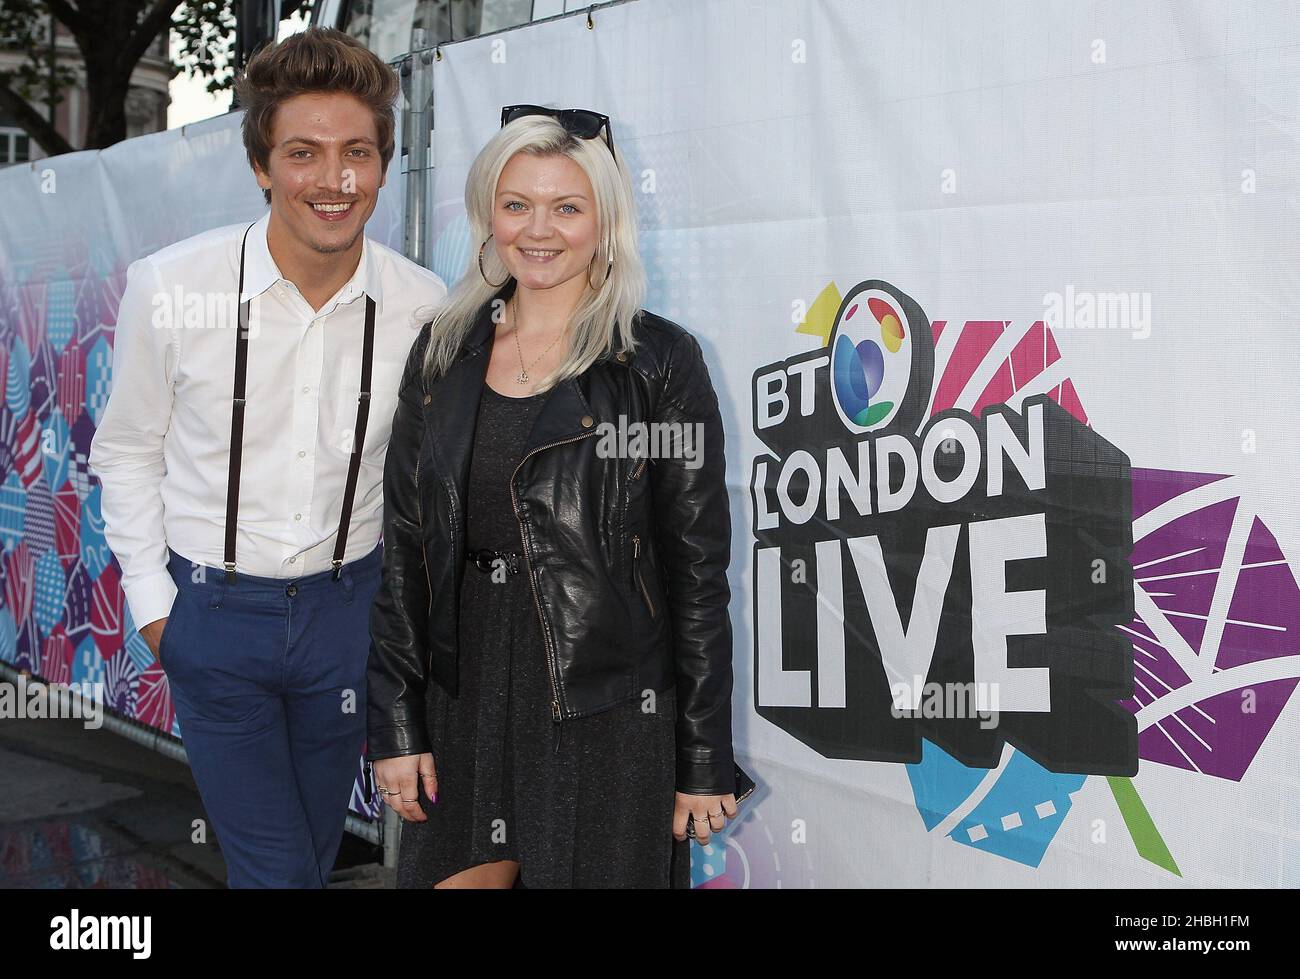 Tyler James, singer/songwriter from the Voice, with DJ Polly James of Absolute Radio at the BT London Live Paralympics Opening Ceremony at Trafalgar Square in London. Stock Photo